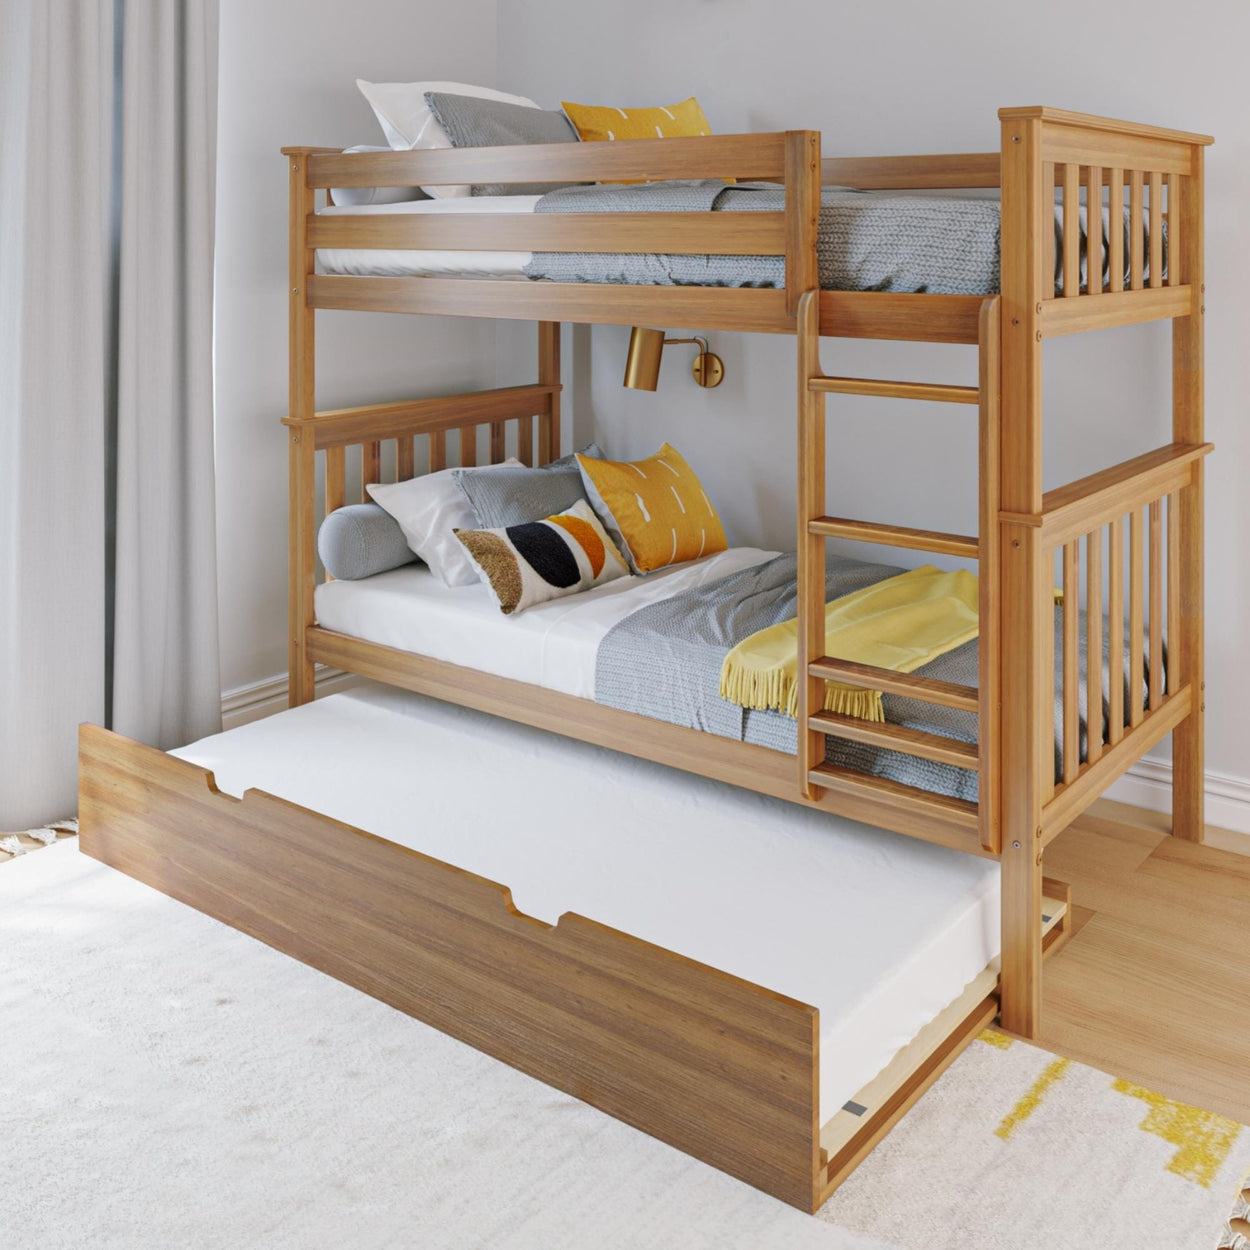 186201-007 : Bunk Beds Classic Twin over Twin Bunk Bed with Trundle, Pecan